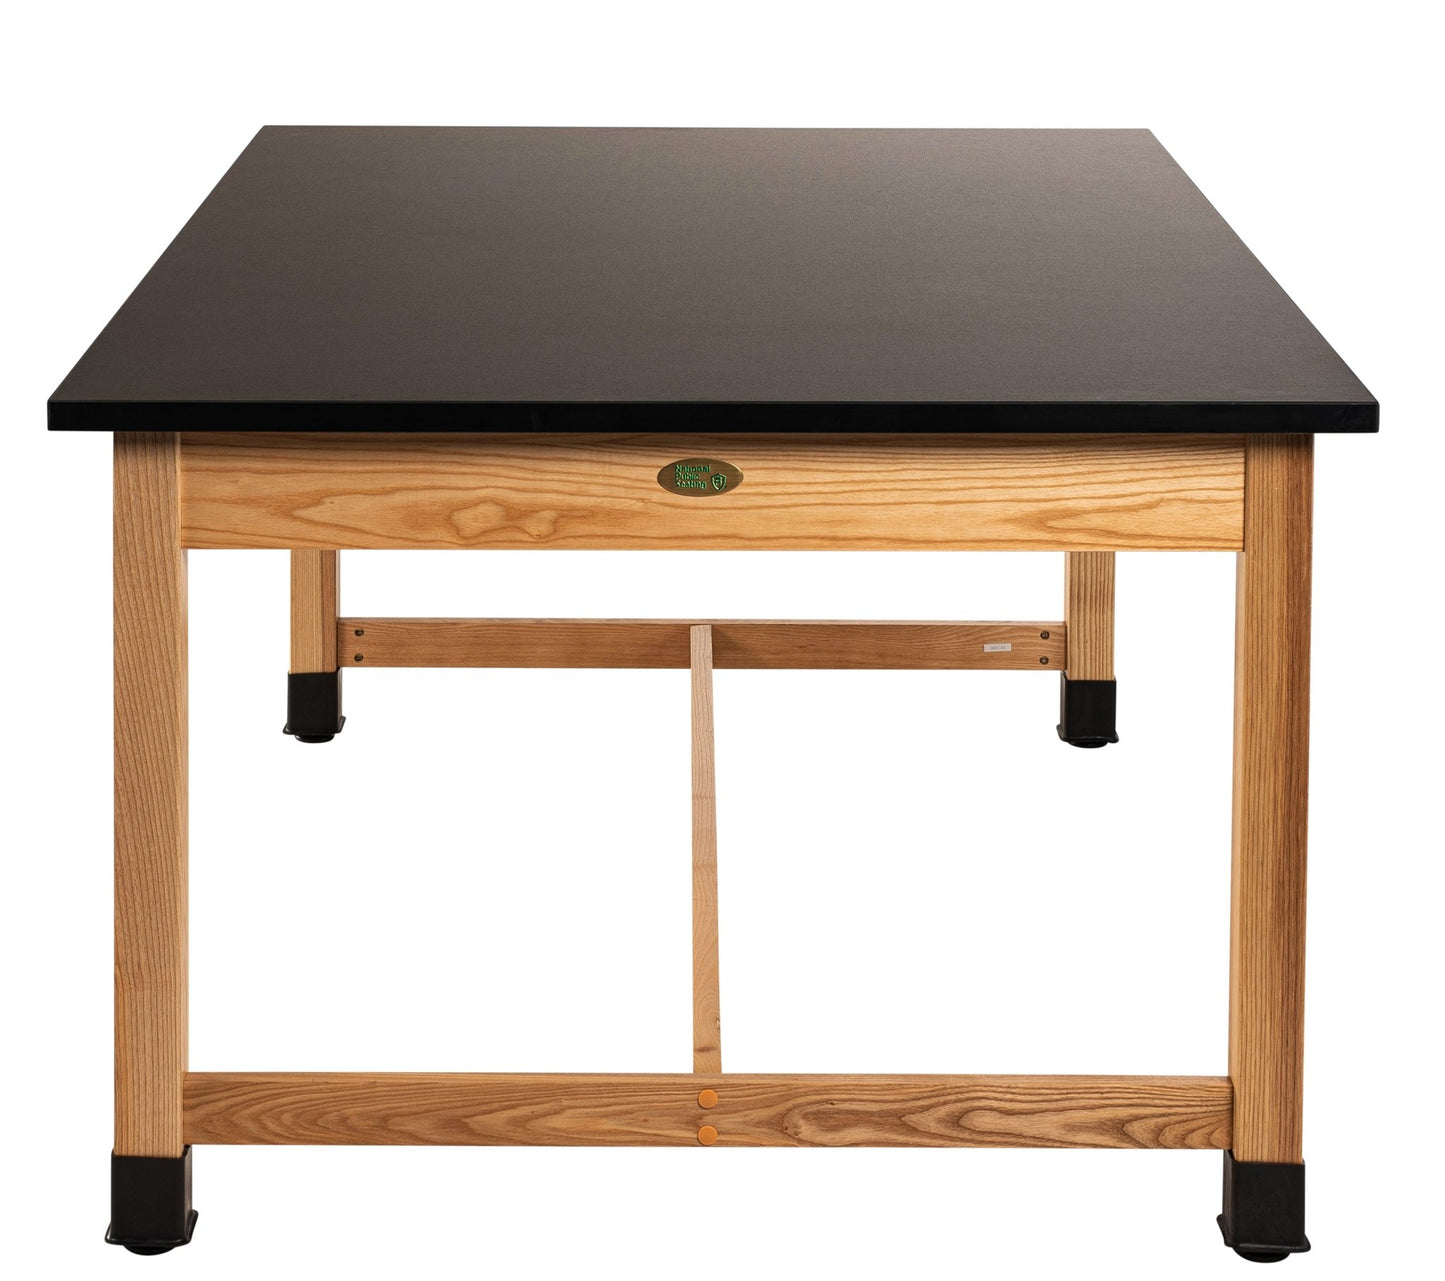 NPS Wood Science Lab Table, 42 x 60 x 30, Phenolic Top (National Public Seating NPS-SLT1-4260P) - SchoolOutlet